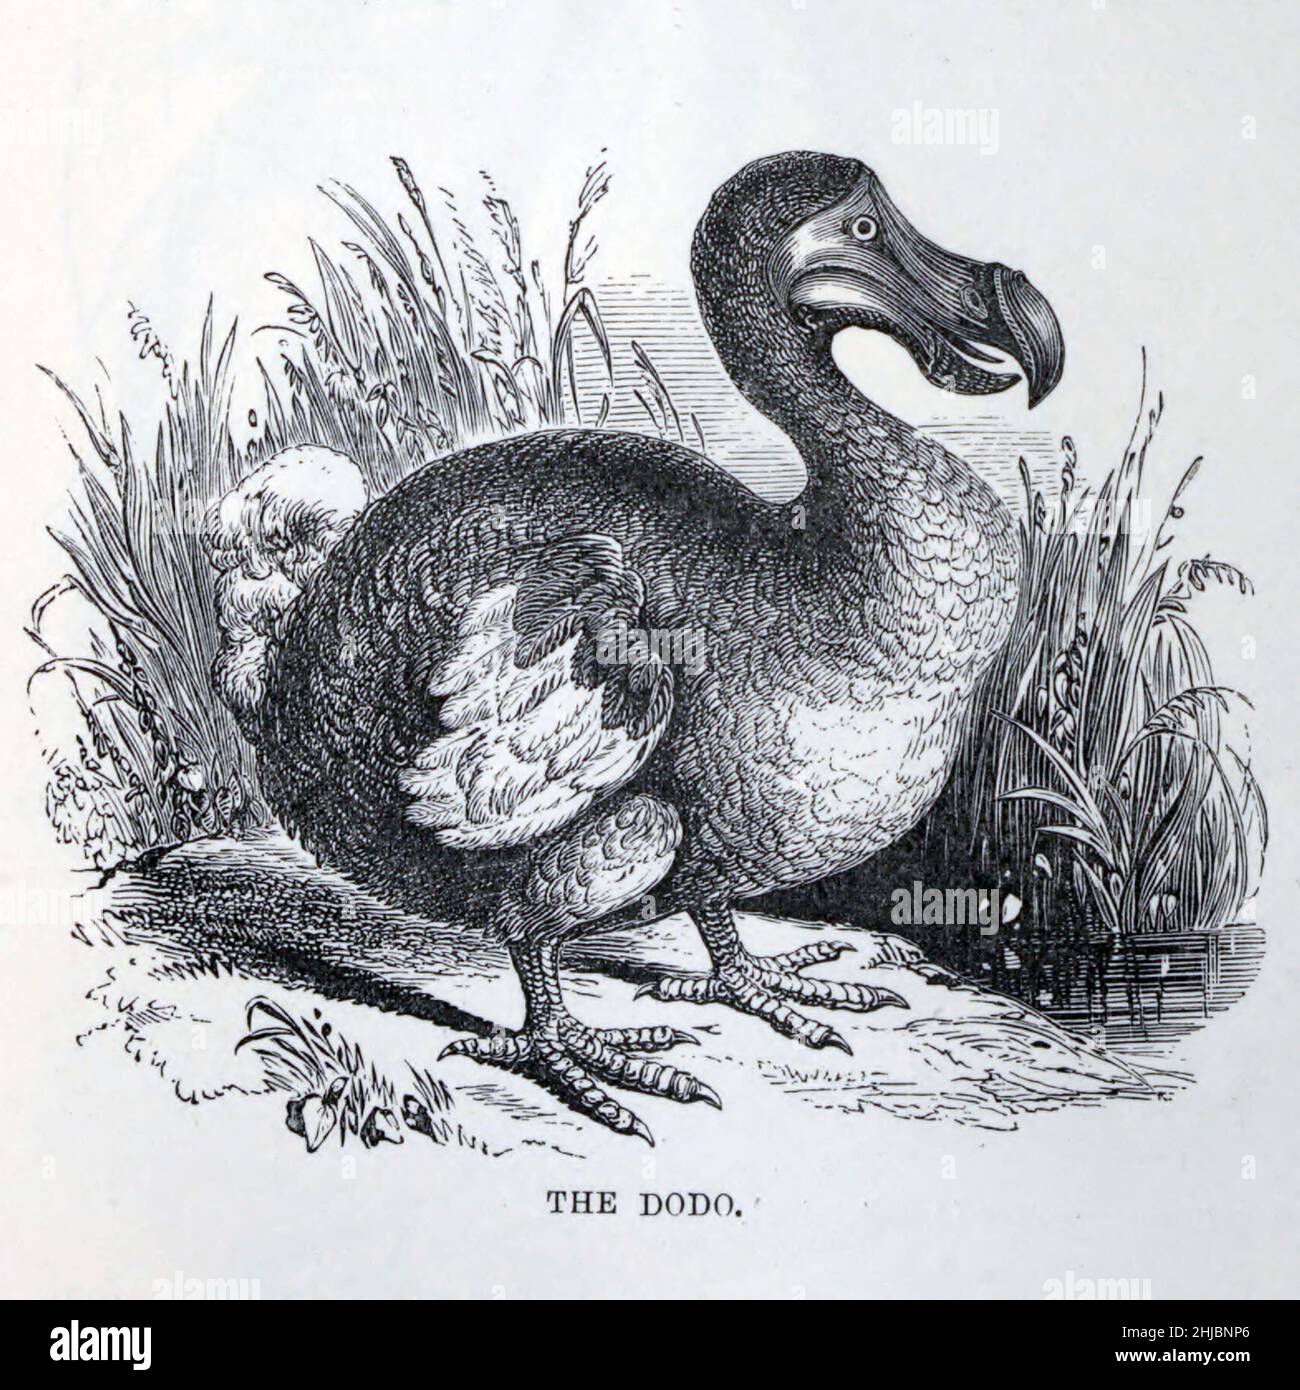 Engraving of a dodo, an extinct, flightless bird, related to the pigeon. The size of a swan, it was heavily-built and clumsy. Two species were known with certainty: the common dodo Raphus cucullatus from Mauritius, which became extinct between 1665 and 1670, and the Rodriguez solitaire Pezophaps solitaria from the neighbouring island of Rodriguez, which died out around 1761. The dodo's numbers quickly dwindled following the arrival of humans to these isolated habitats. All but defenceless, they were ill-equipped to cope with the new hunters & the competition from other introduced species. from Stock Photo